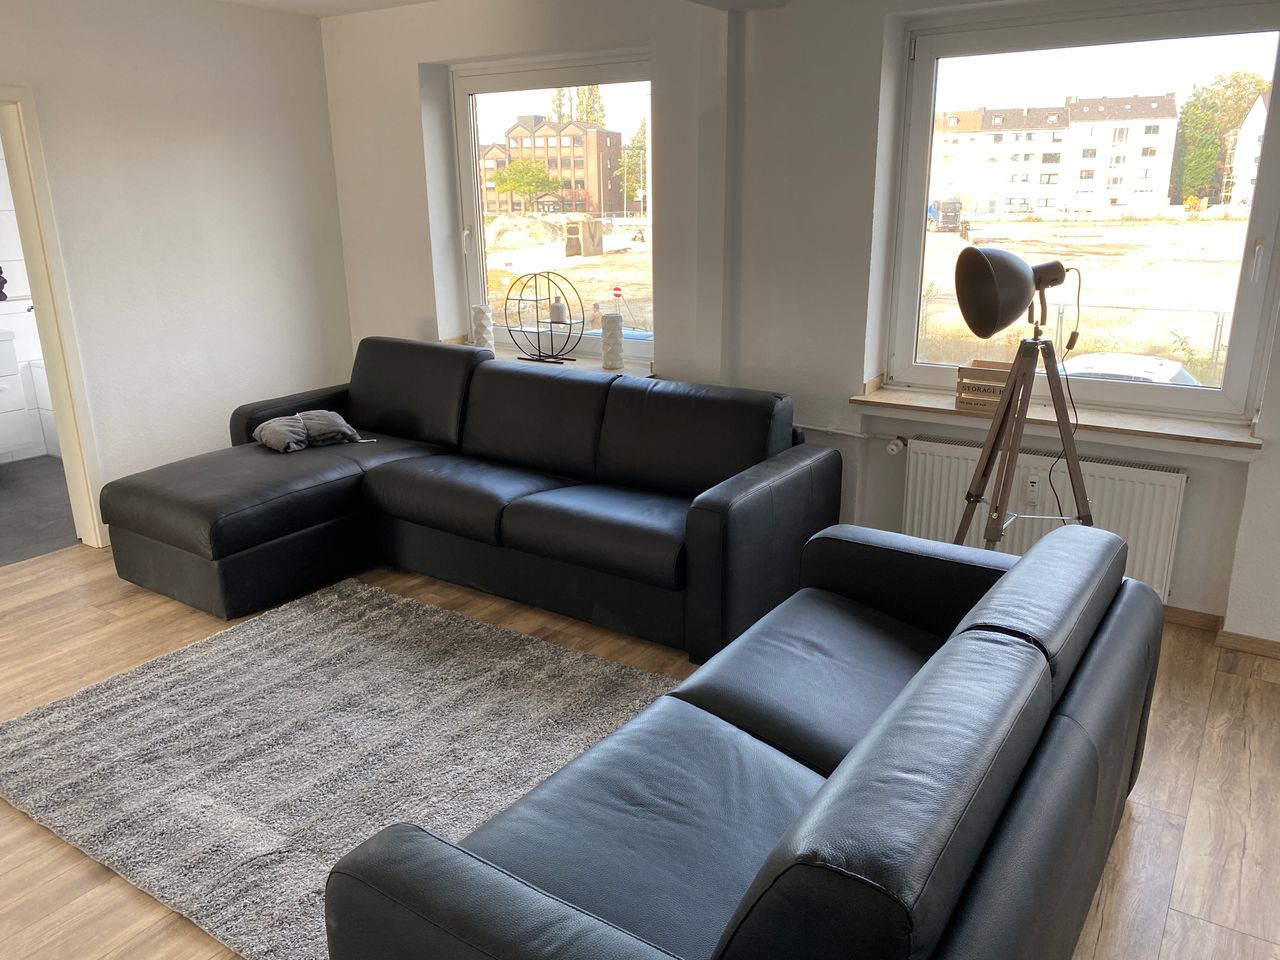 top refurbished apartment in the center (pedestrian zone 2 minutes) for up to 6 people - first time use